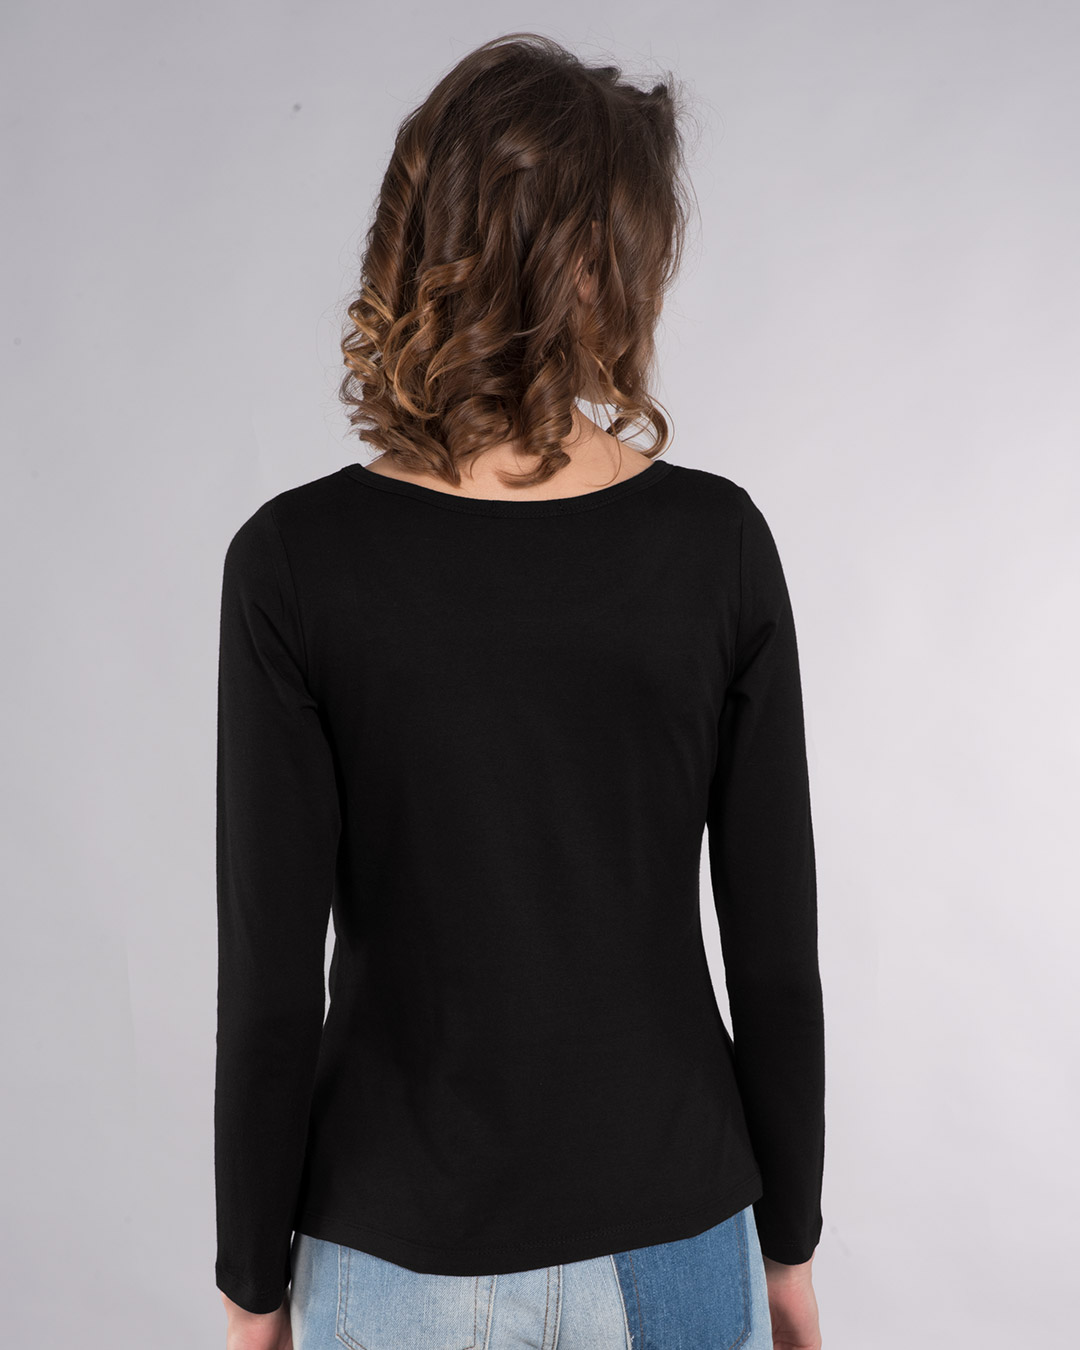 Shop Vacation Mode On Scoop Neck Full Sleeve T-Shirt-Back